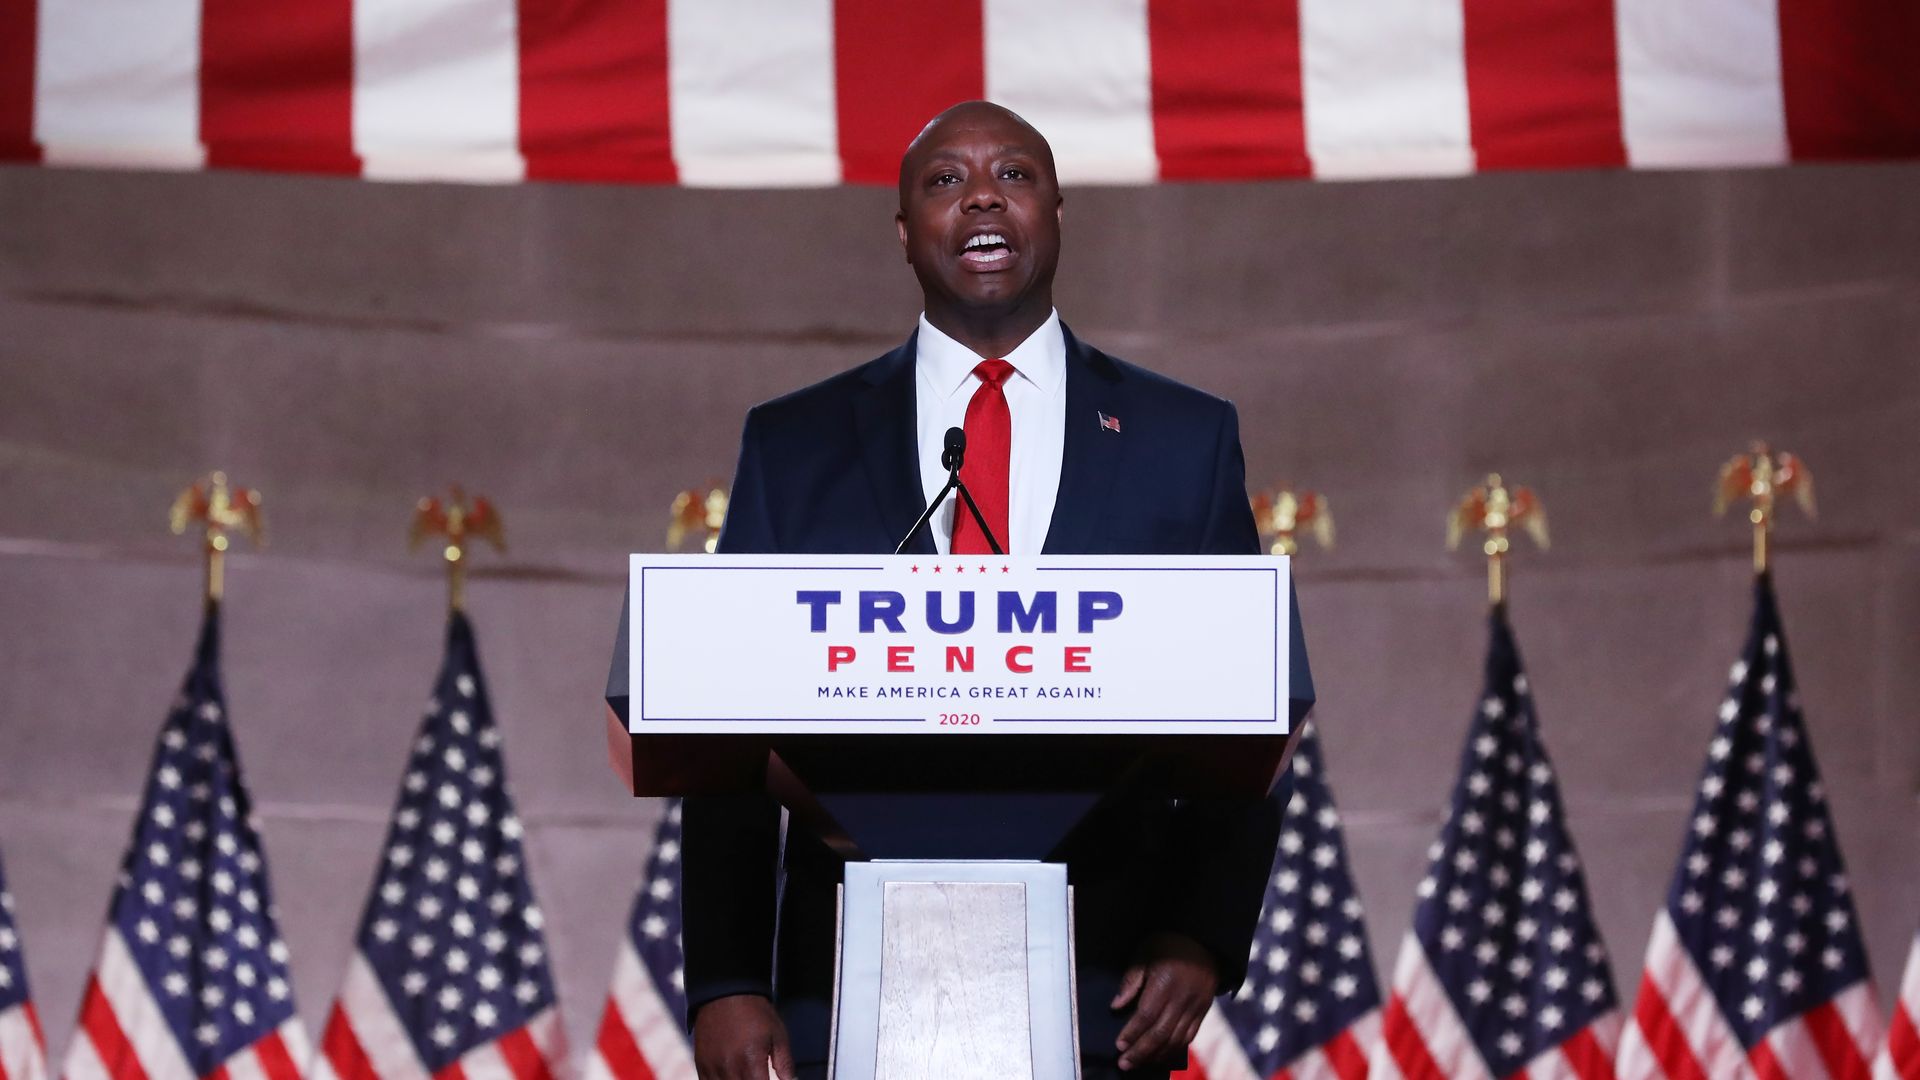 U.S. Sen. Tim Scott (R-SC) stands on stage in an empty Mellon Auditorium while addressing the Republican National Convention 